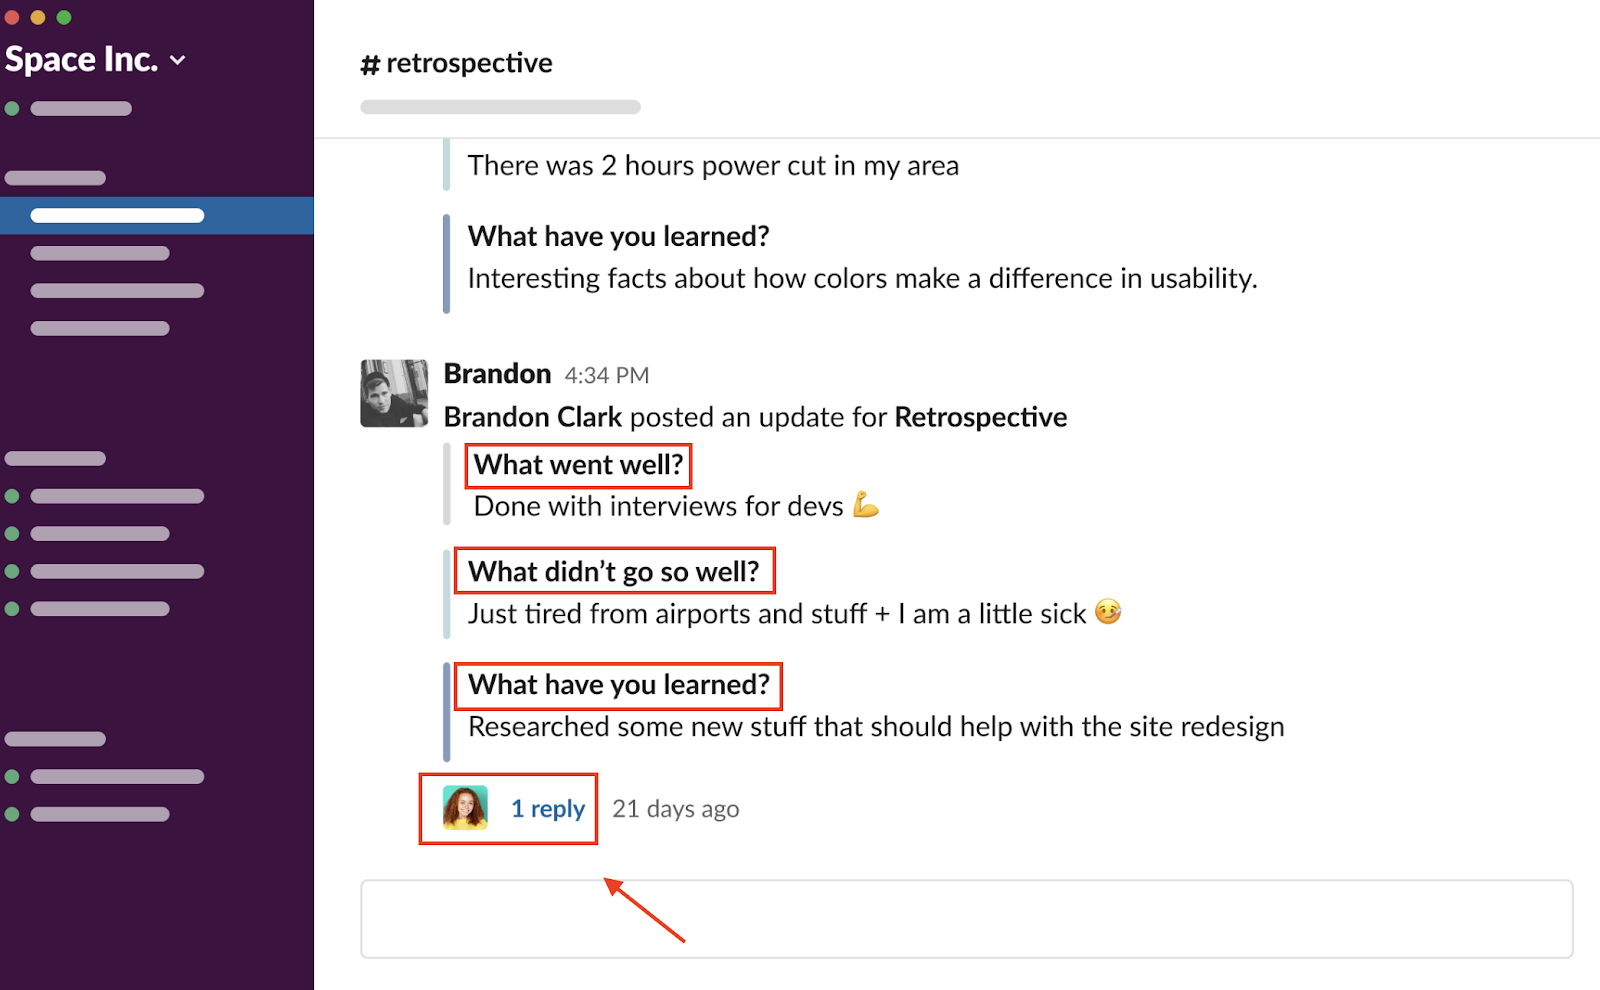 Geekbot gives the option of having a #retrospective channel within Slack.